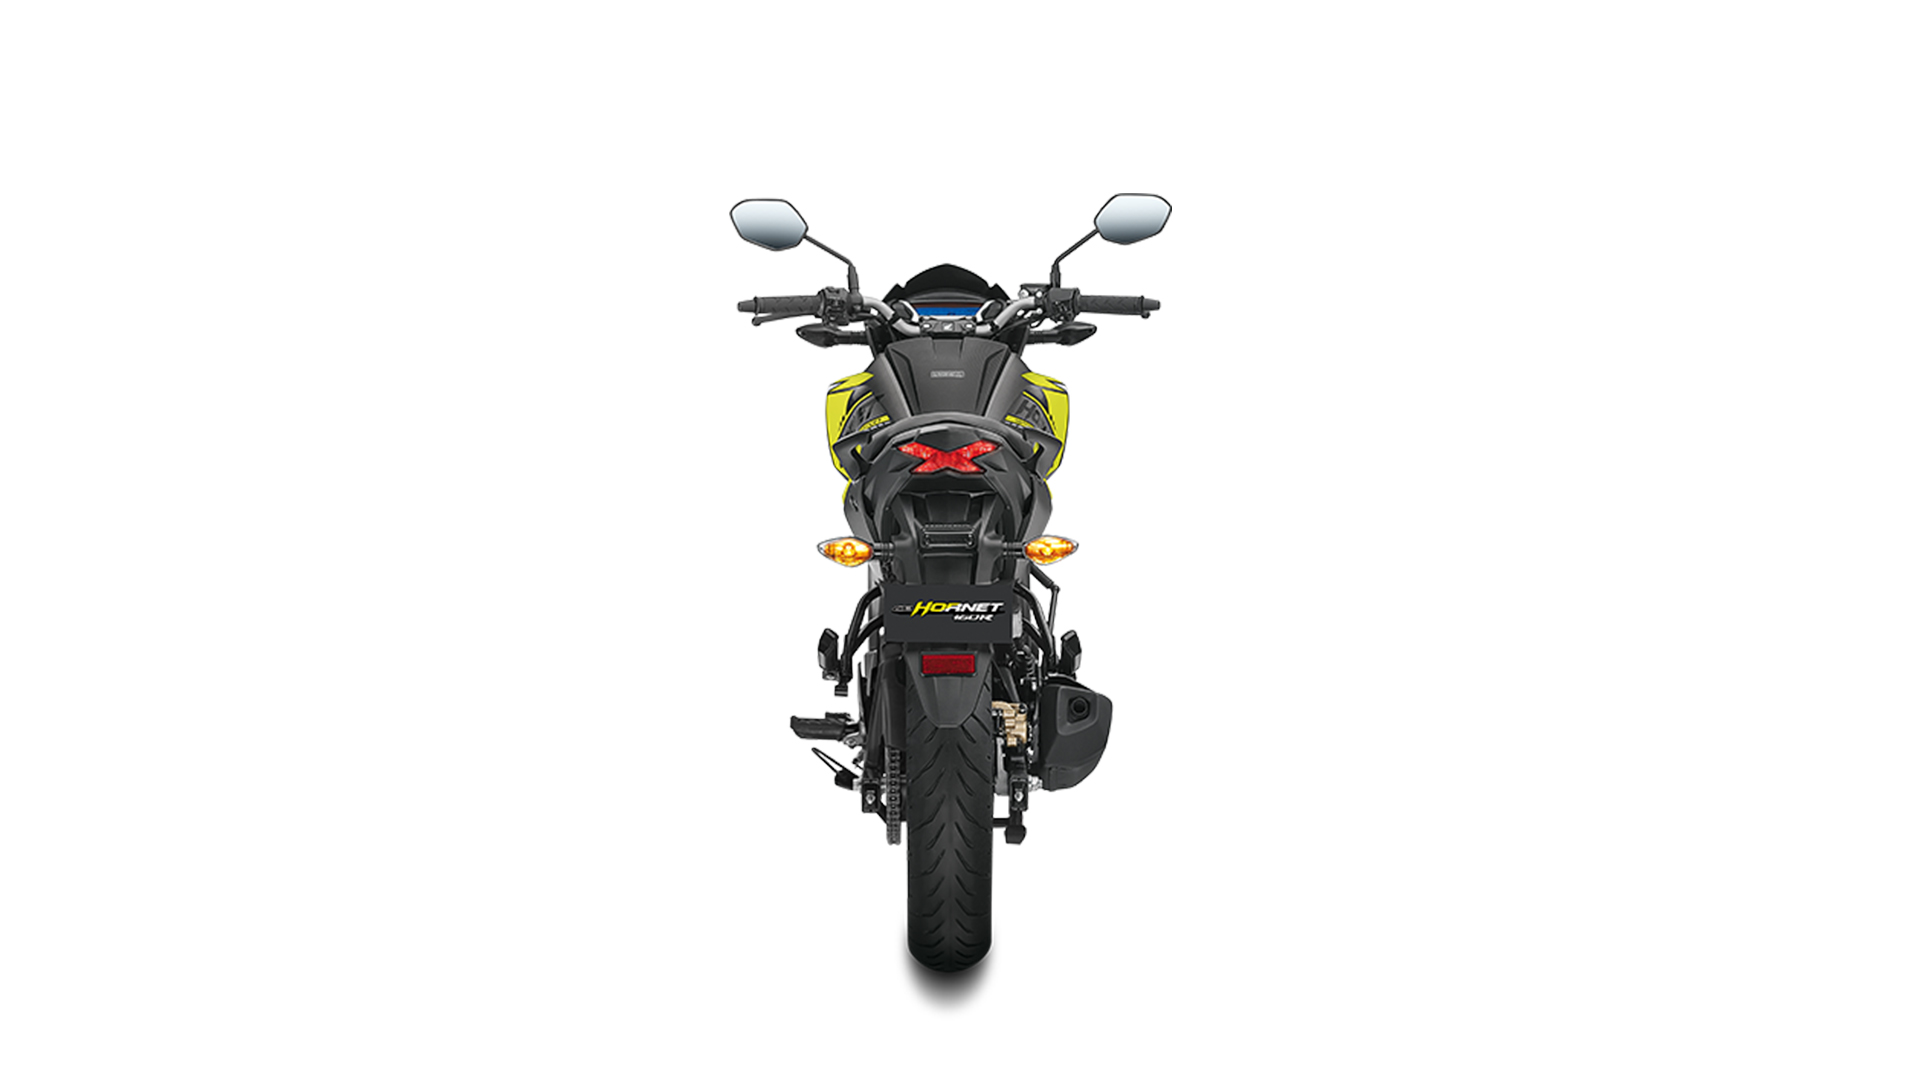 Honda Cb Hornet 160r 18 Abs Std Price Mileage Reviews Specification Gallery Overdrive